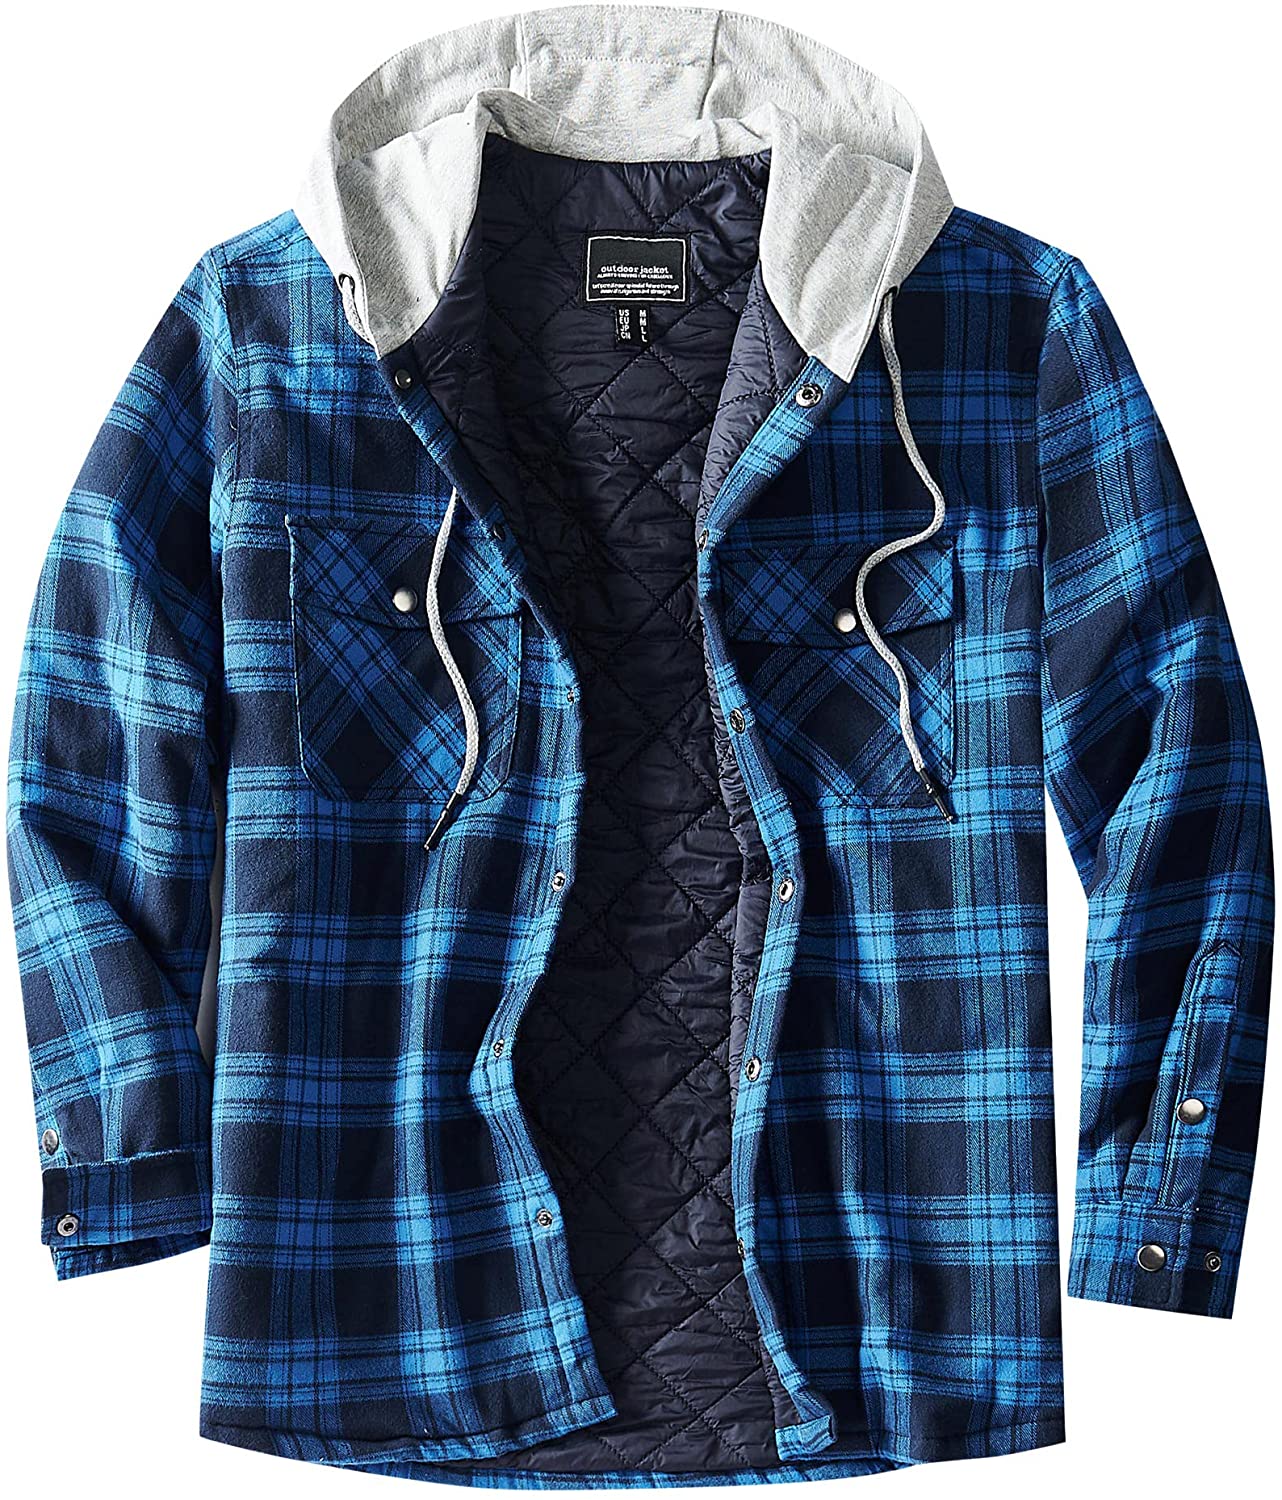 Men's Plaid Flannel Shirt Jacket Fully Quilted Lined Pocket Warm Zip-Up ...